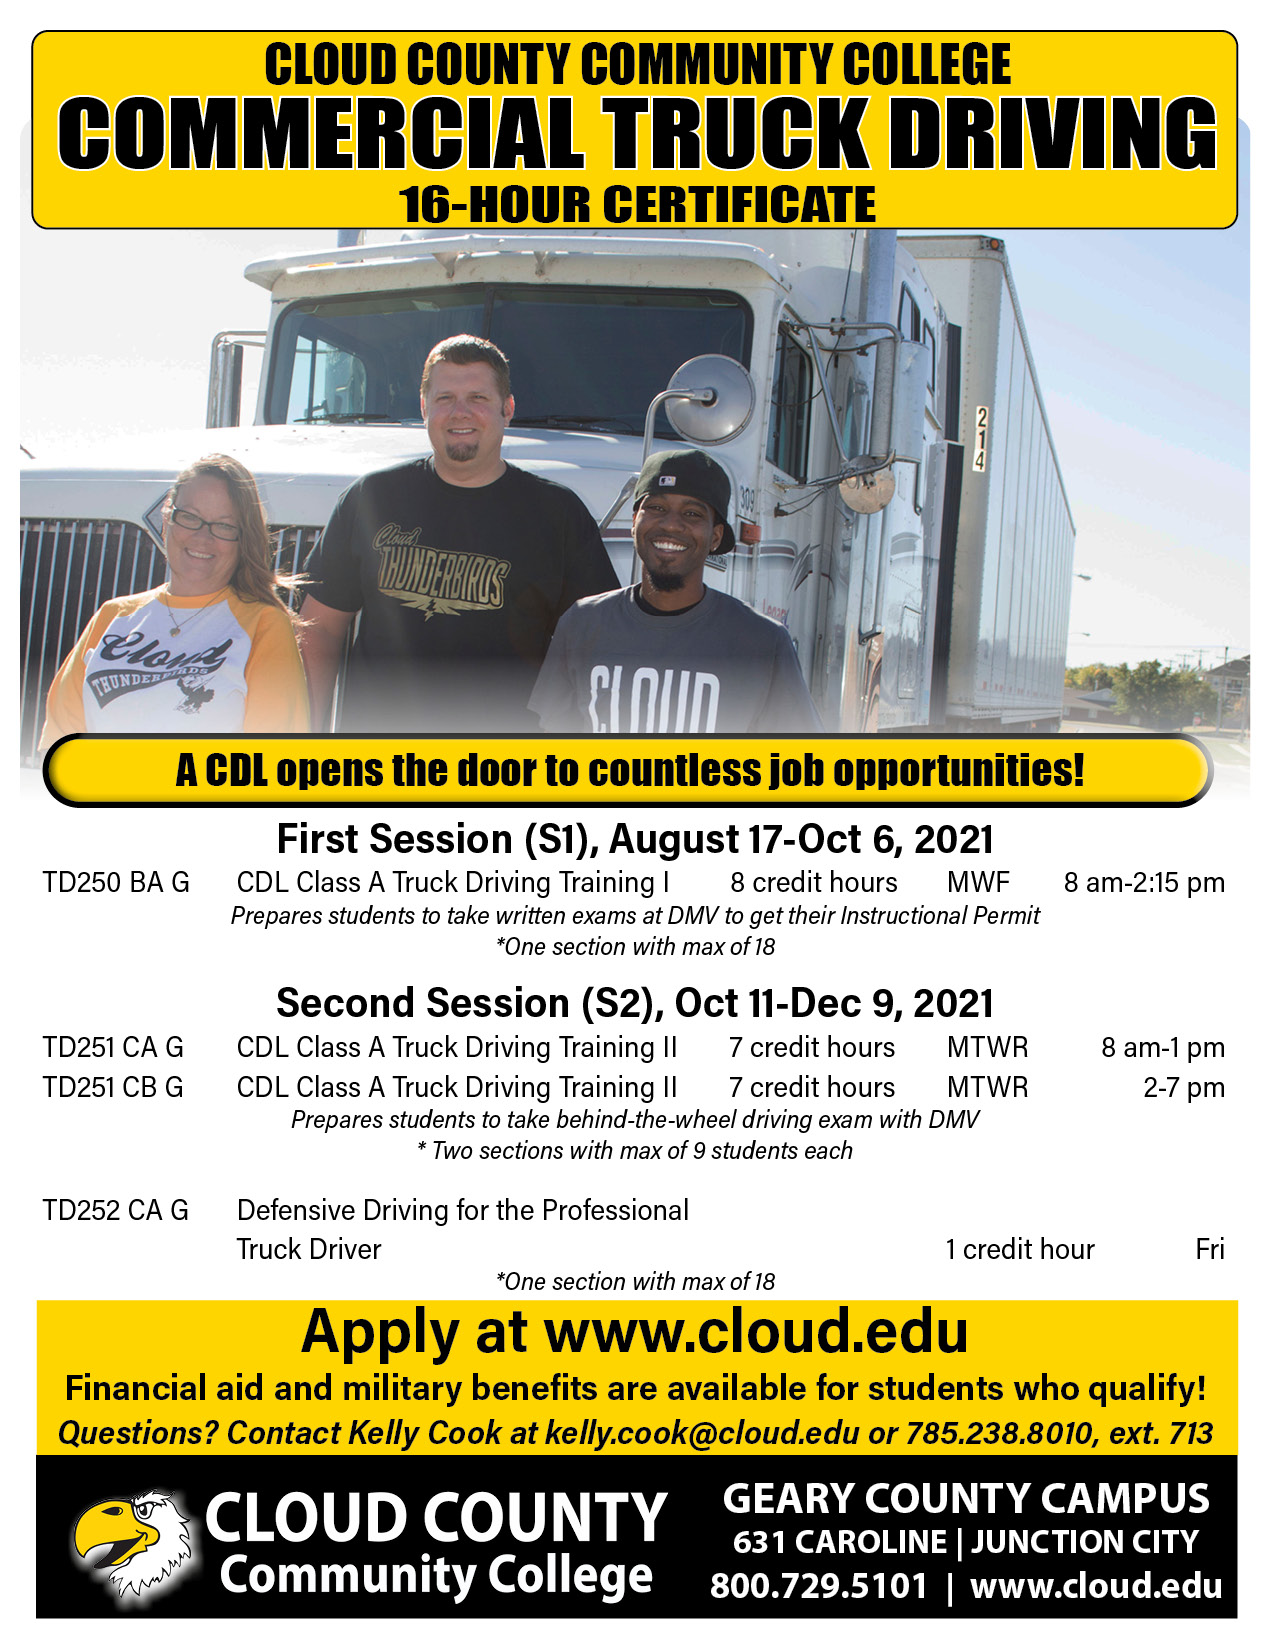 The CDL 16 hour certificate information.